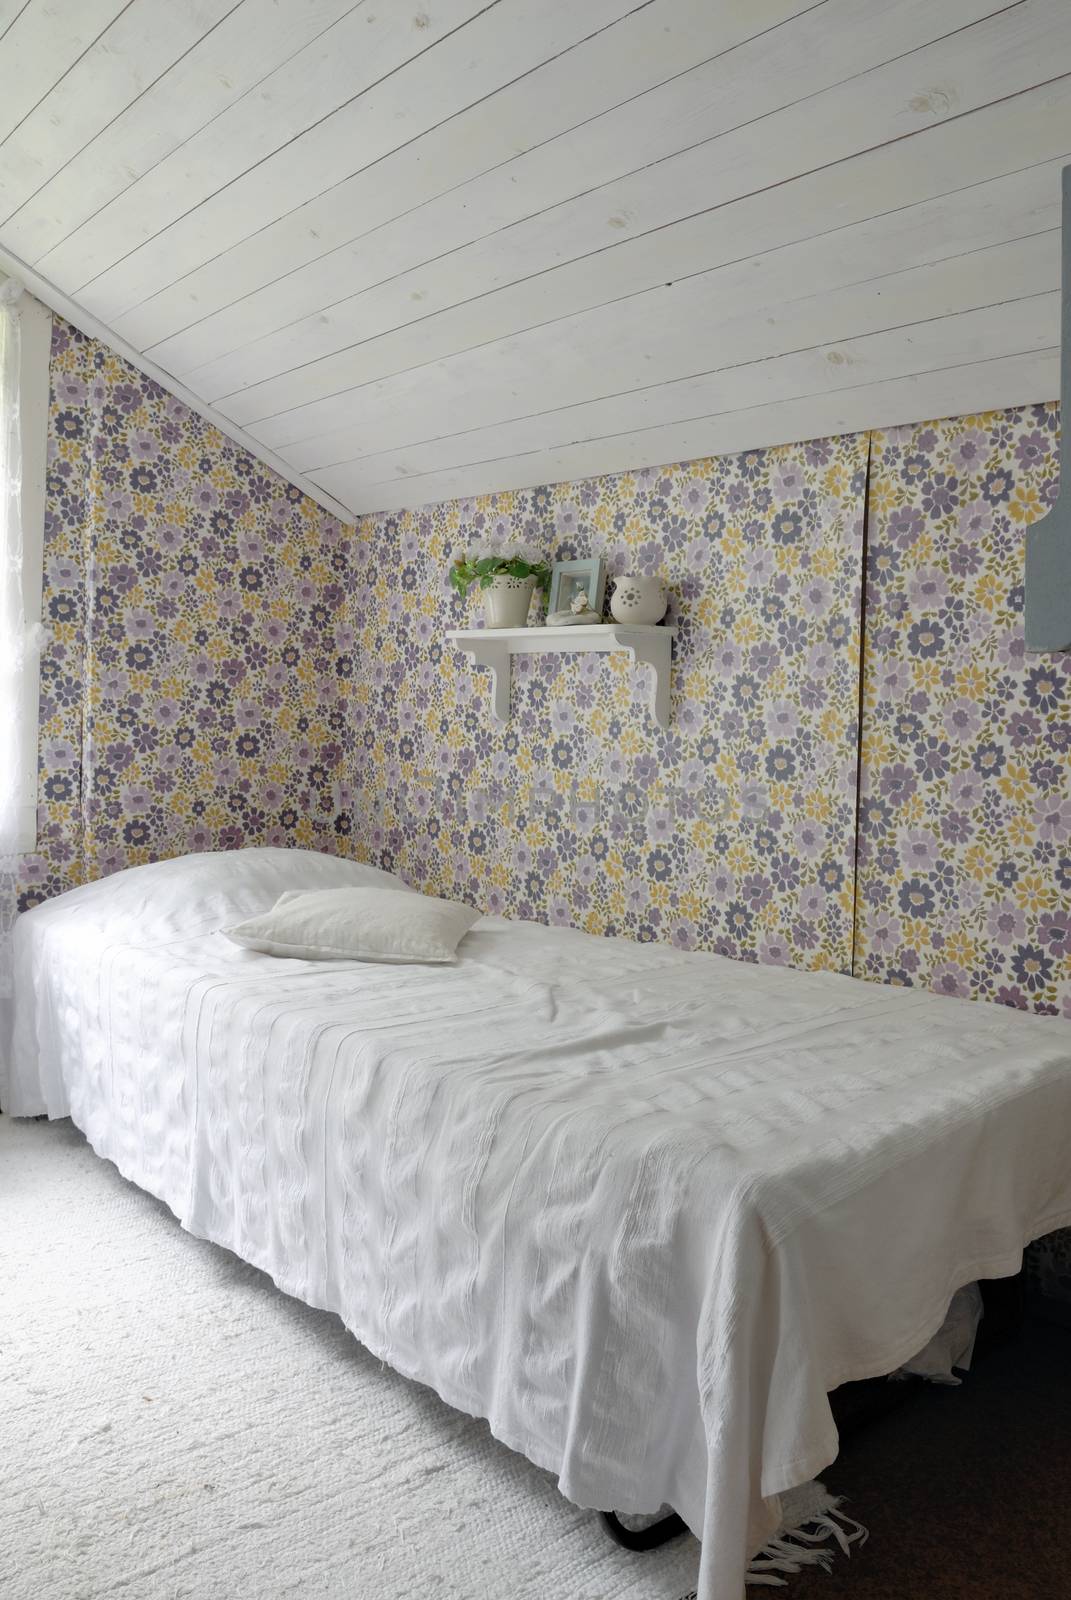 Bedroom in a Swedish country house